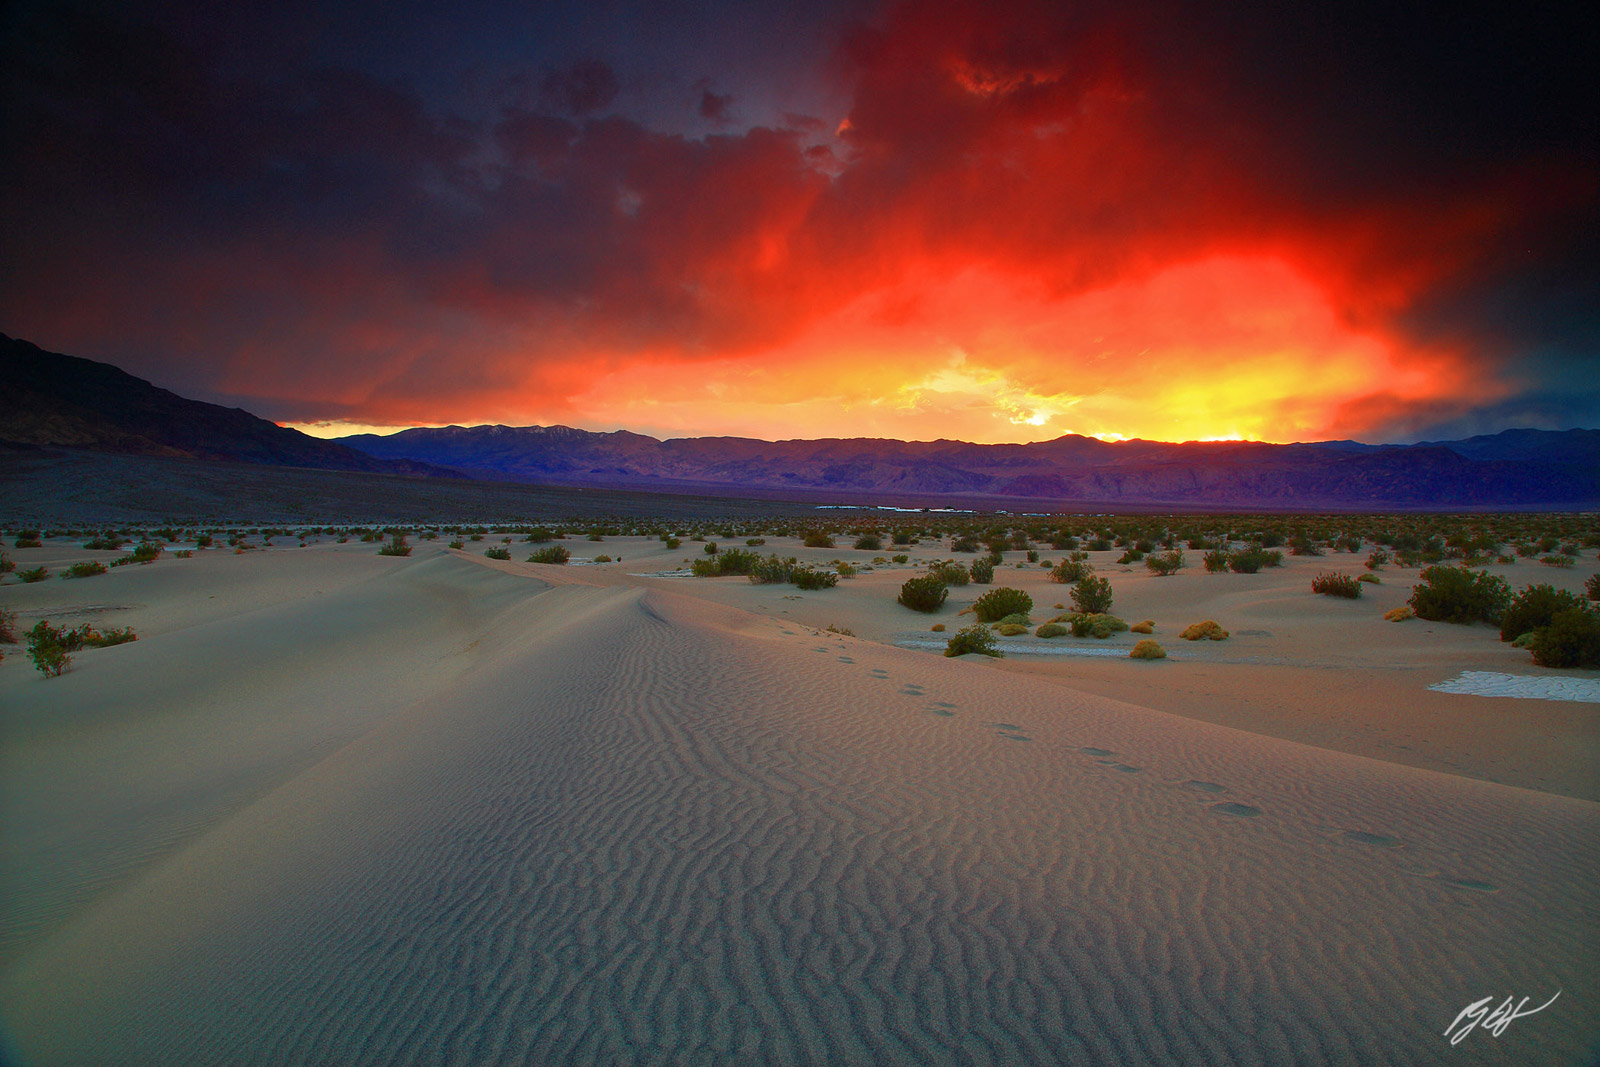 Sunset in the Mesquite Dunes in Death Valley National Park in Utah